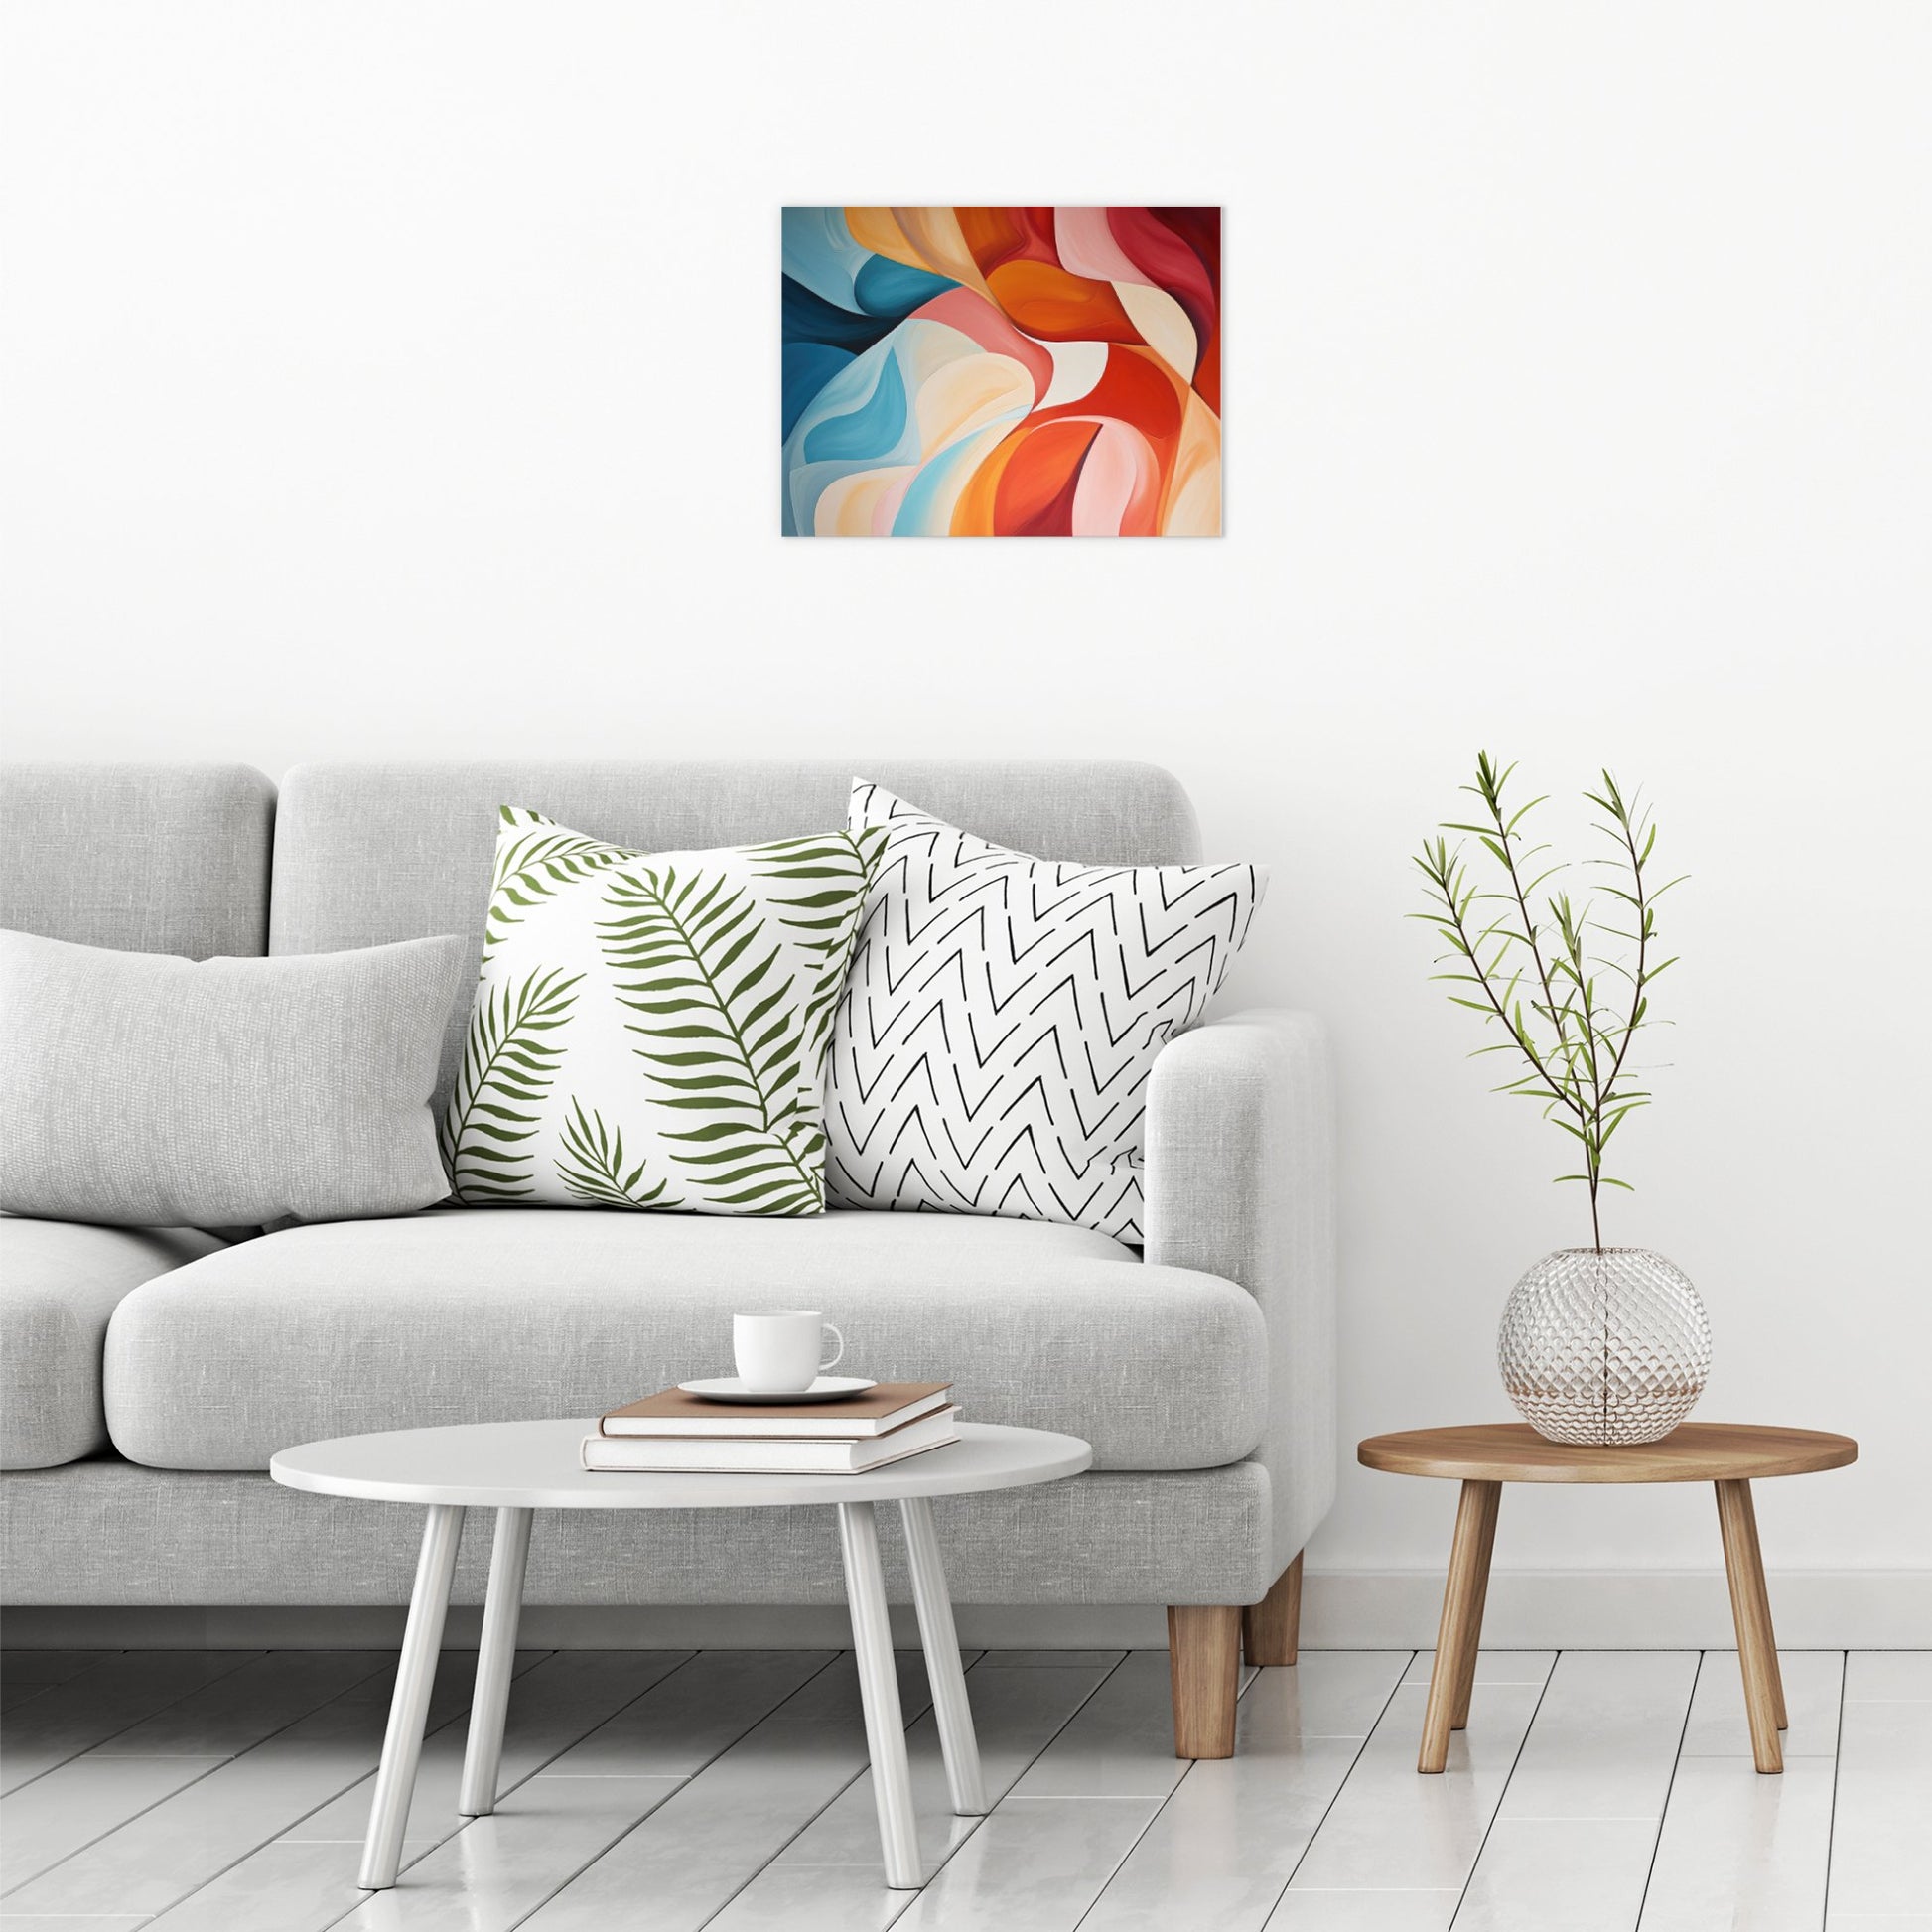 A contemporary modern room view showing a medium size metal art poster display plate with printed design of a Turbulence Abstract Painting